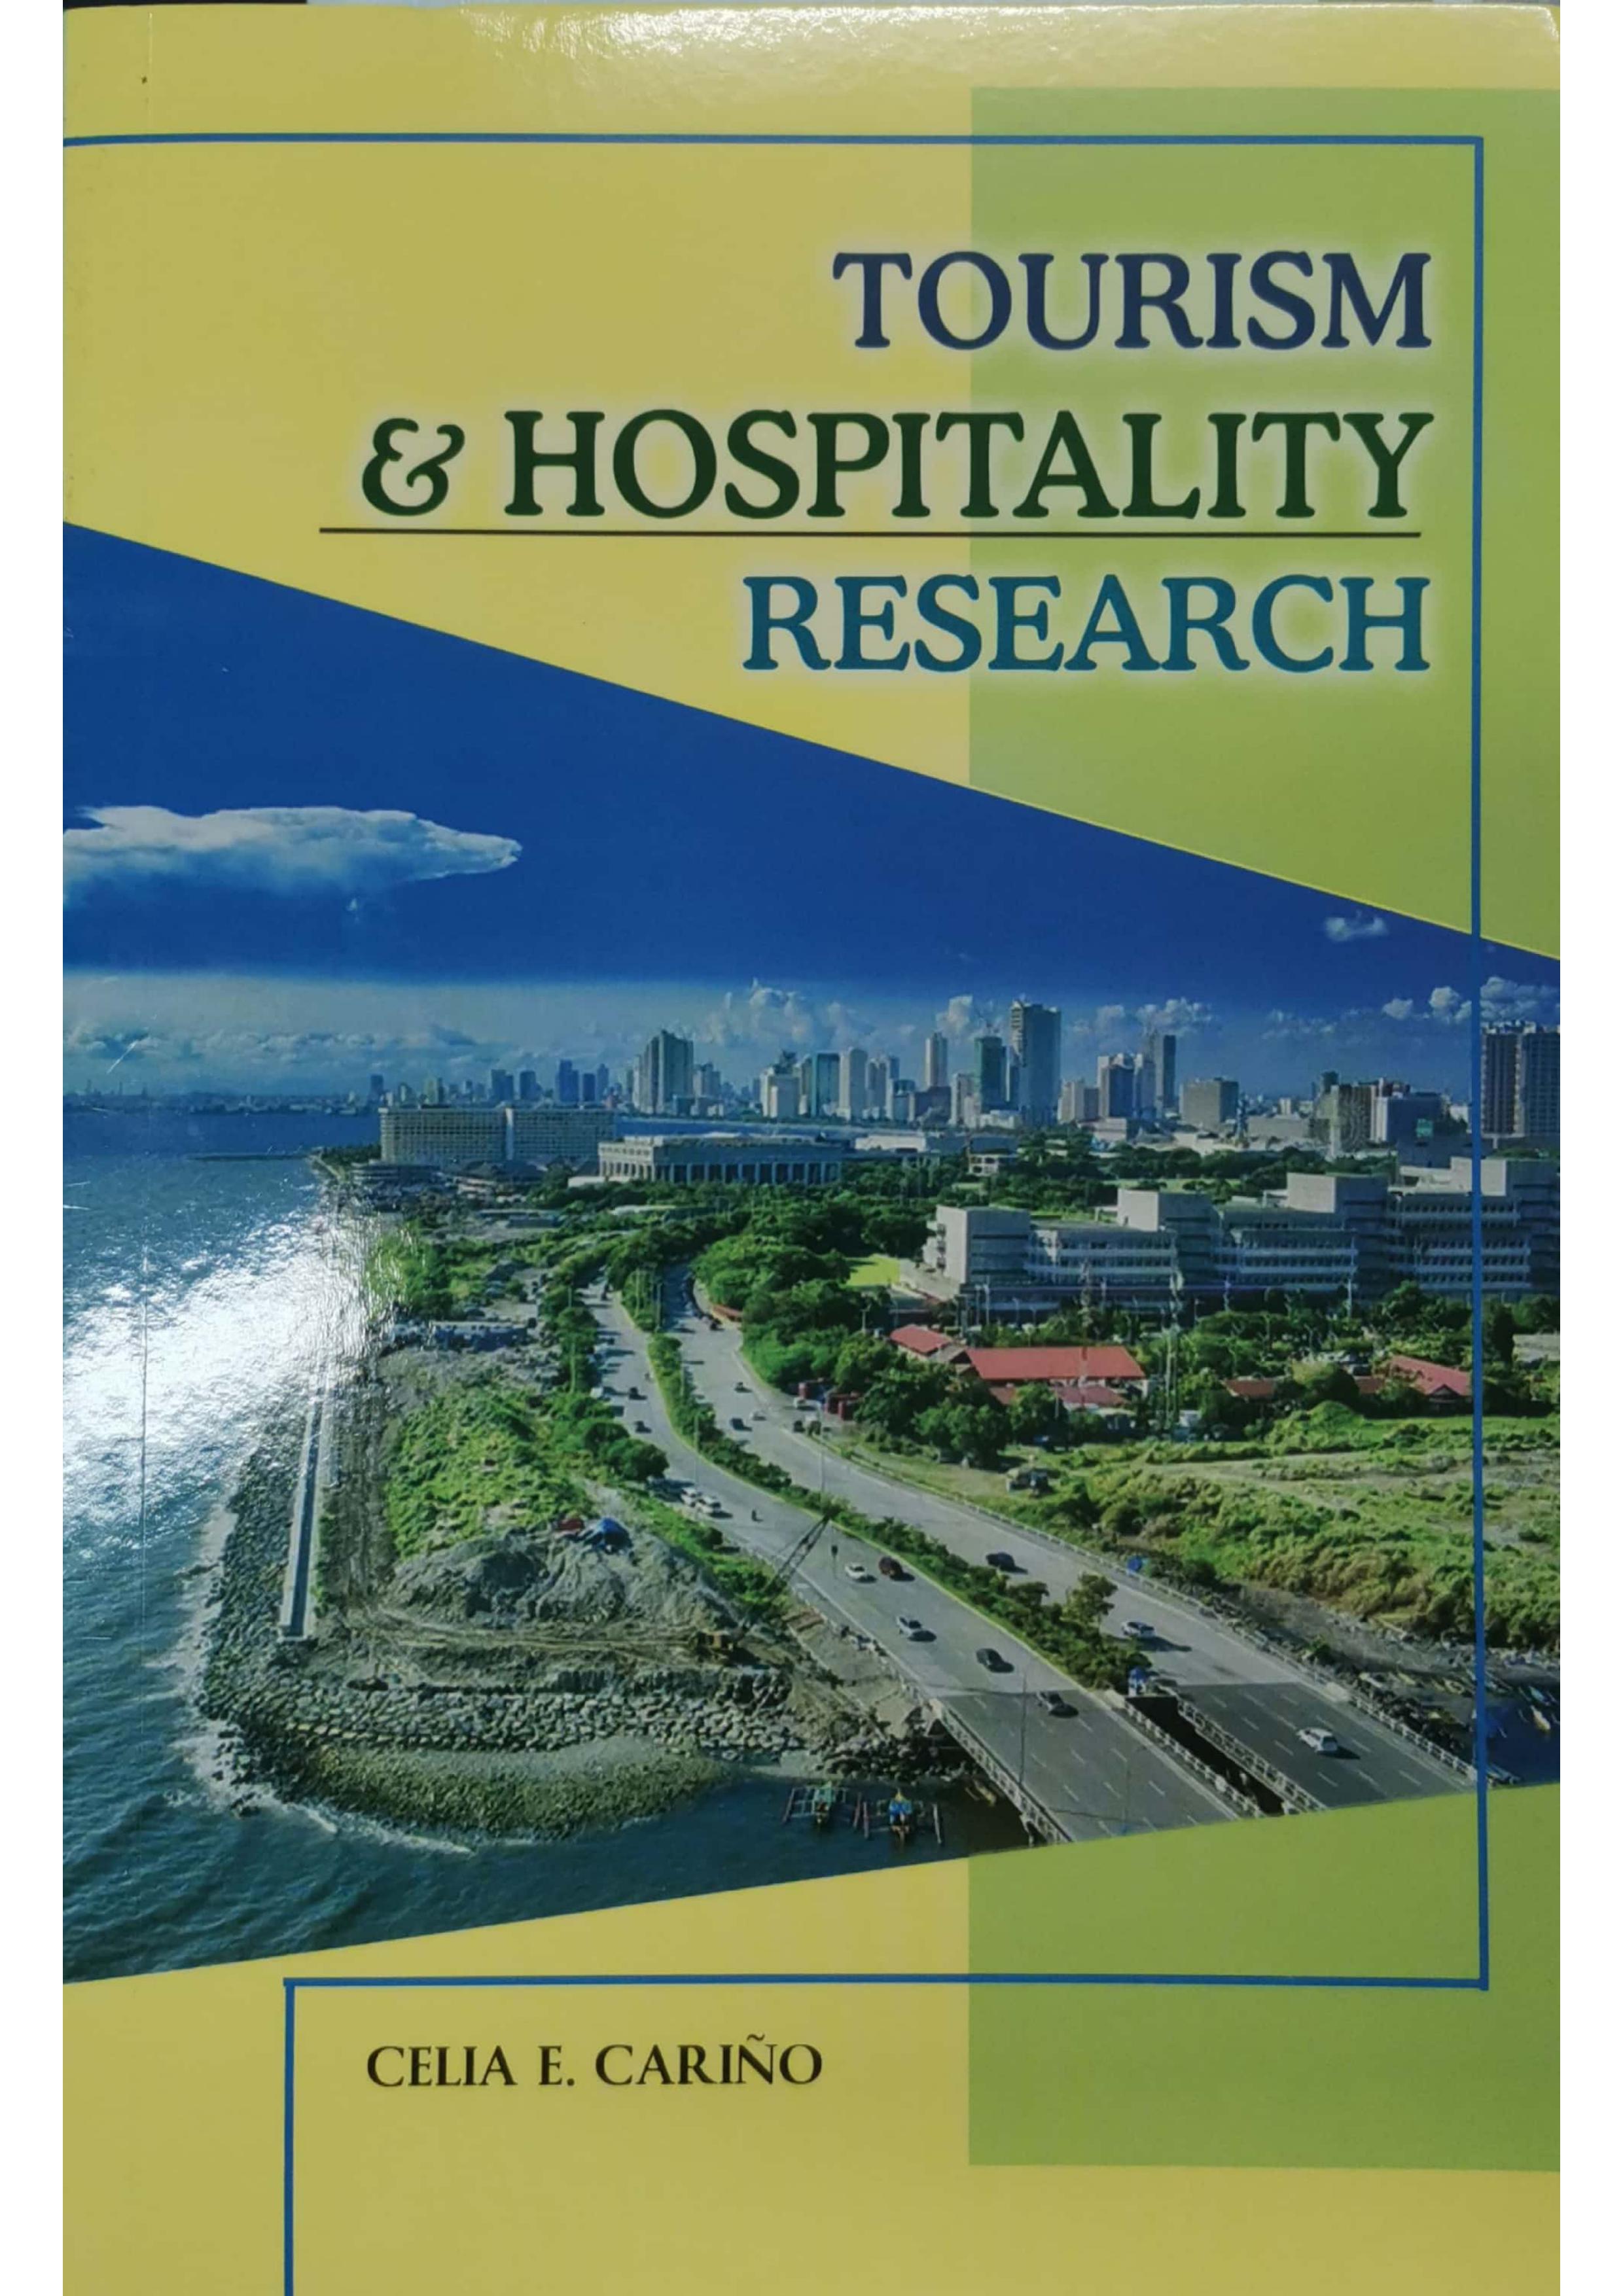 case study related to hospitality and tourism industry